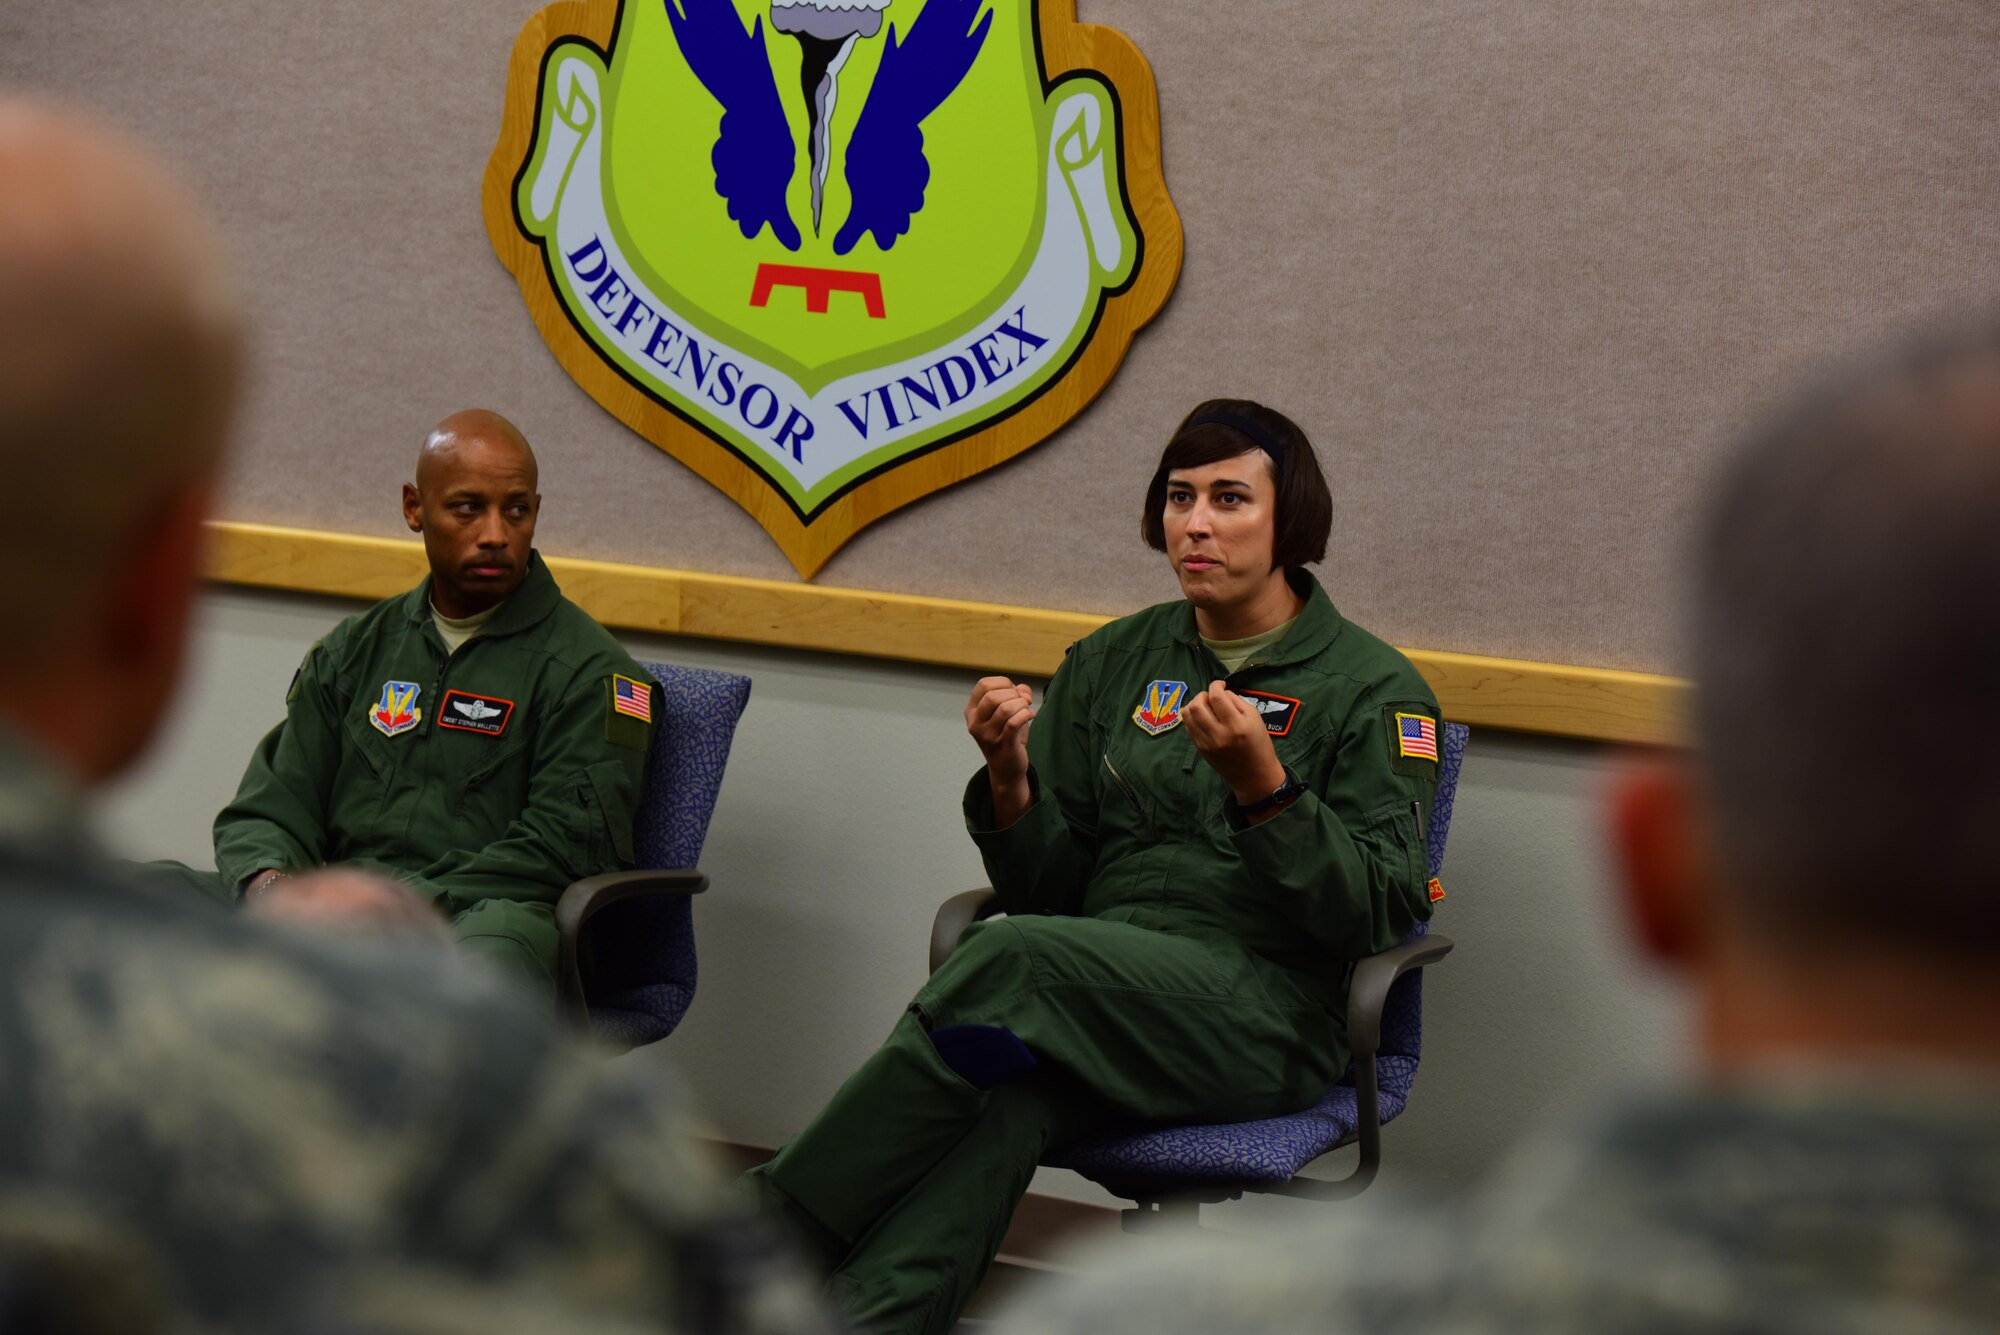 U.S. Air Force Staff Sgt. Ashleigh Buch, the 338th Combat Training Squadron assistant flight chief, and Chief Master Sgt. Stephen Mallette, the 55th Intelligence Support Squadron chief enlisted manager, both assigned to Offutt Air Force Base, Neb., speak during a Lesbian, Gay, Bisexual and Transgender Pride Month forum at Whiteman Air Force Base, Mo., June 6, 2017. During the event, Buch shared her experiences as the first transgender Airman on flying status to complete the transition process under the new policy and the importance of communication to create an open environment. The open forum allowed members of the audience to ask questions about her journey to gain a better understanding of the new policy. It also provided a leadership perspective on how together they navigated the year-and-a-half long process that helped mold the current policy today. (U.S. Air Force photo by Airman 1st Class Jazmin Smith)